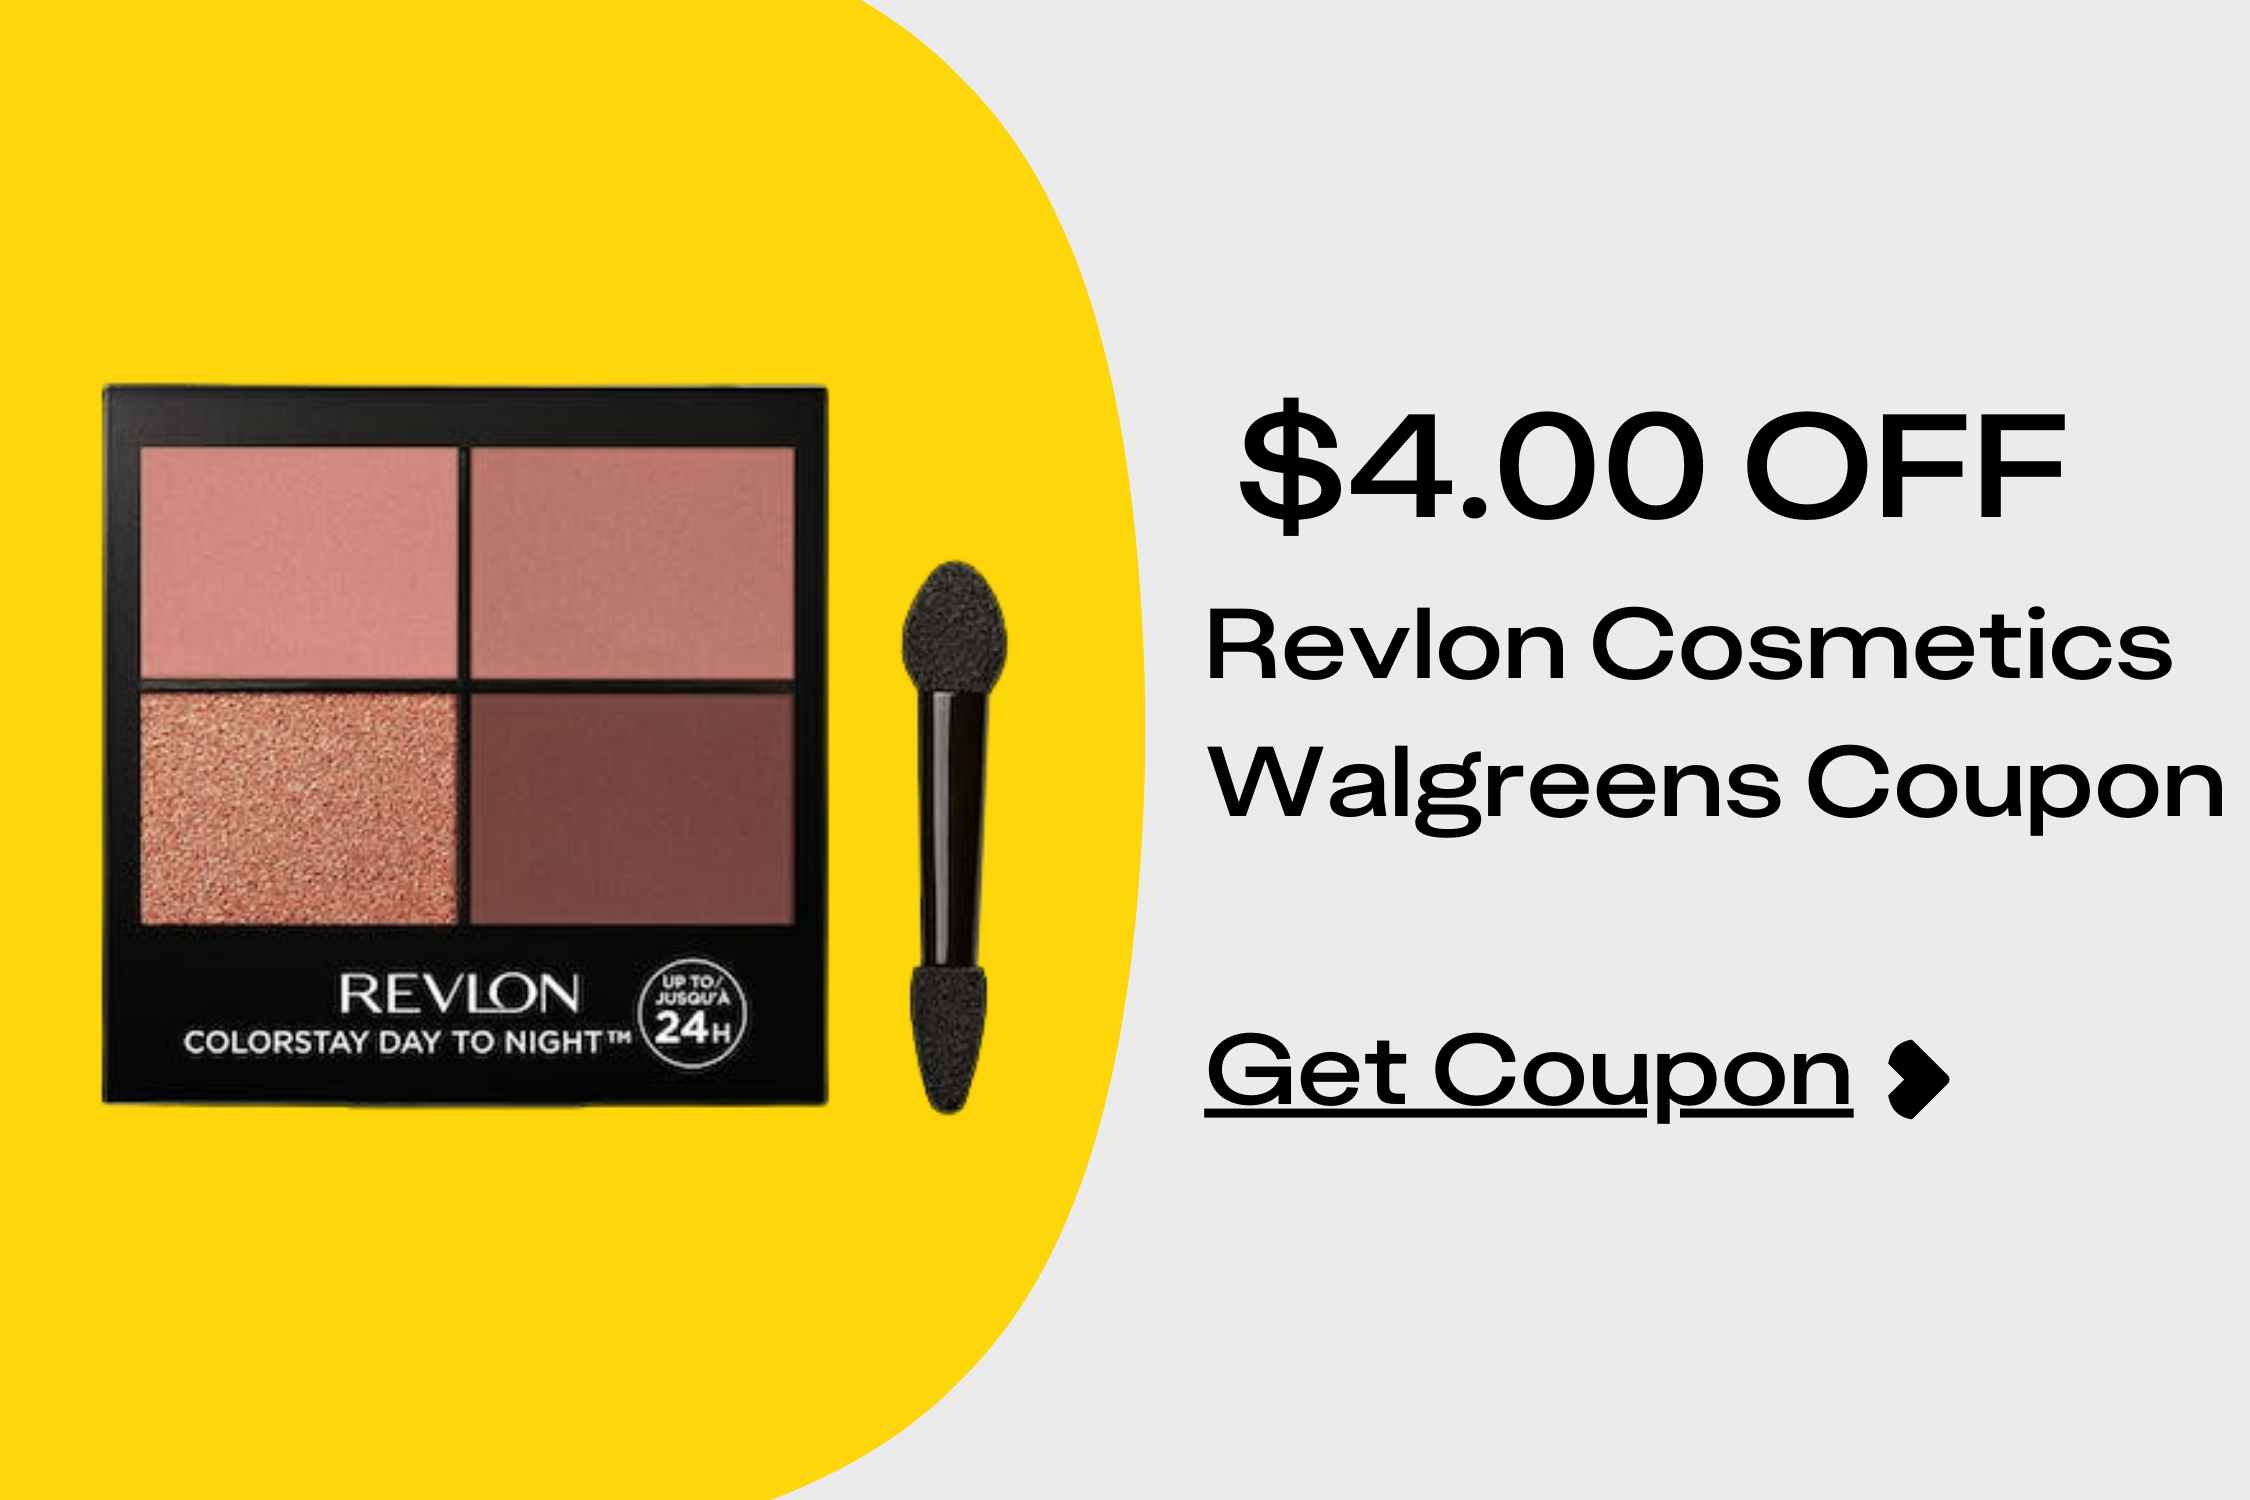 https://prod-cdn-thekrazycouponlady.imgix.net/wp-content/uploads/2023/03/best-revlon-walgreens-coupon-1704443596-1704443597.png?auto=format&fit=fill&q=25